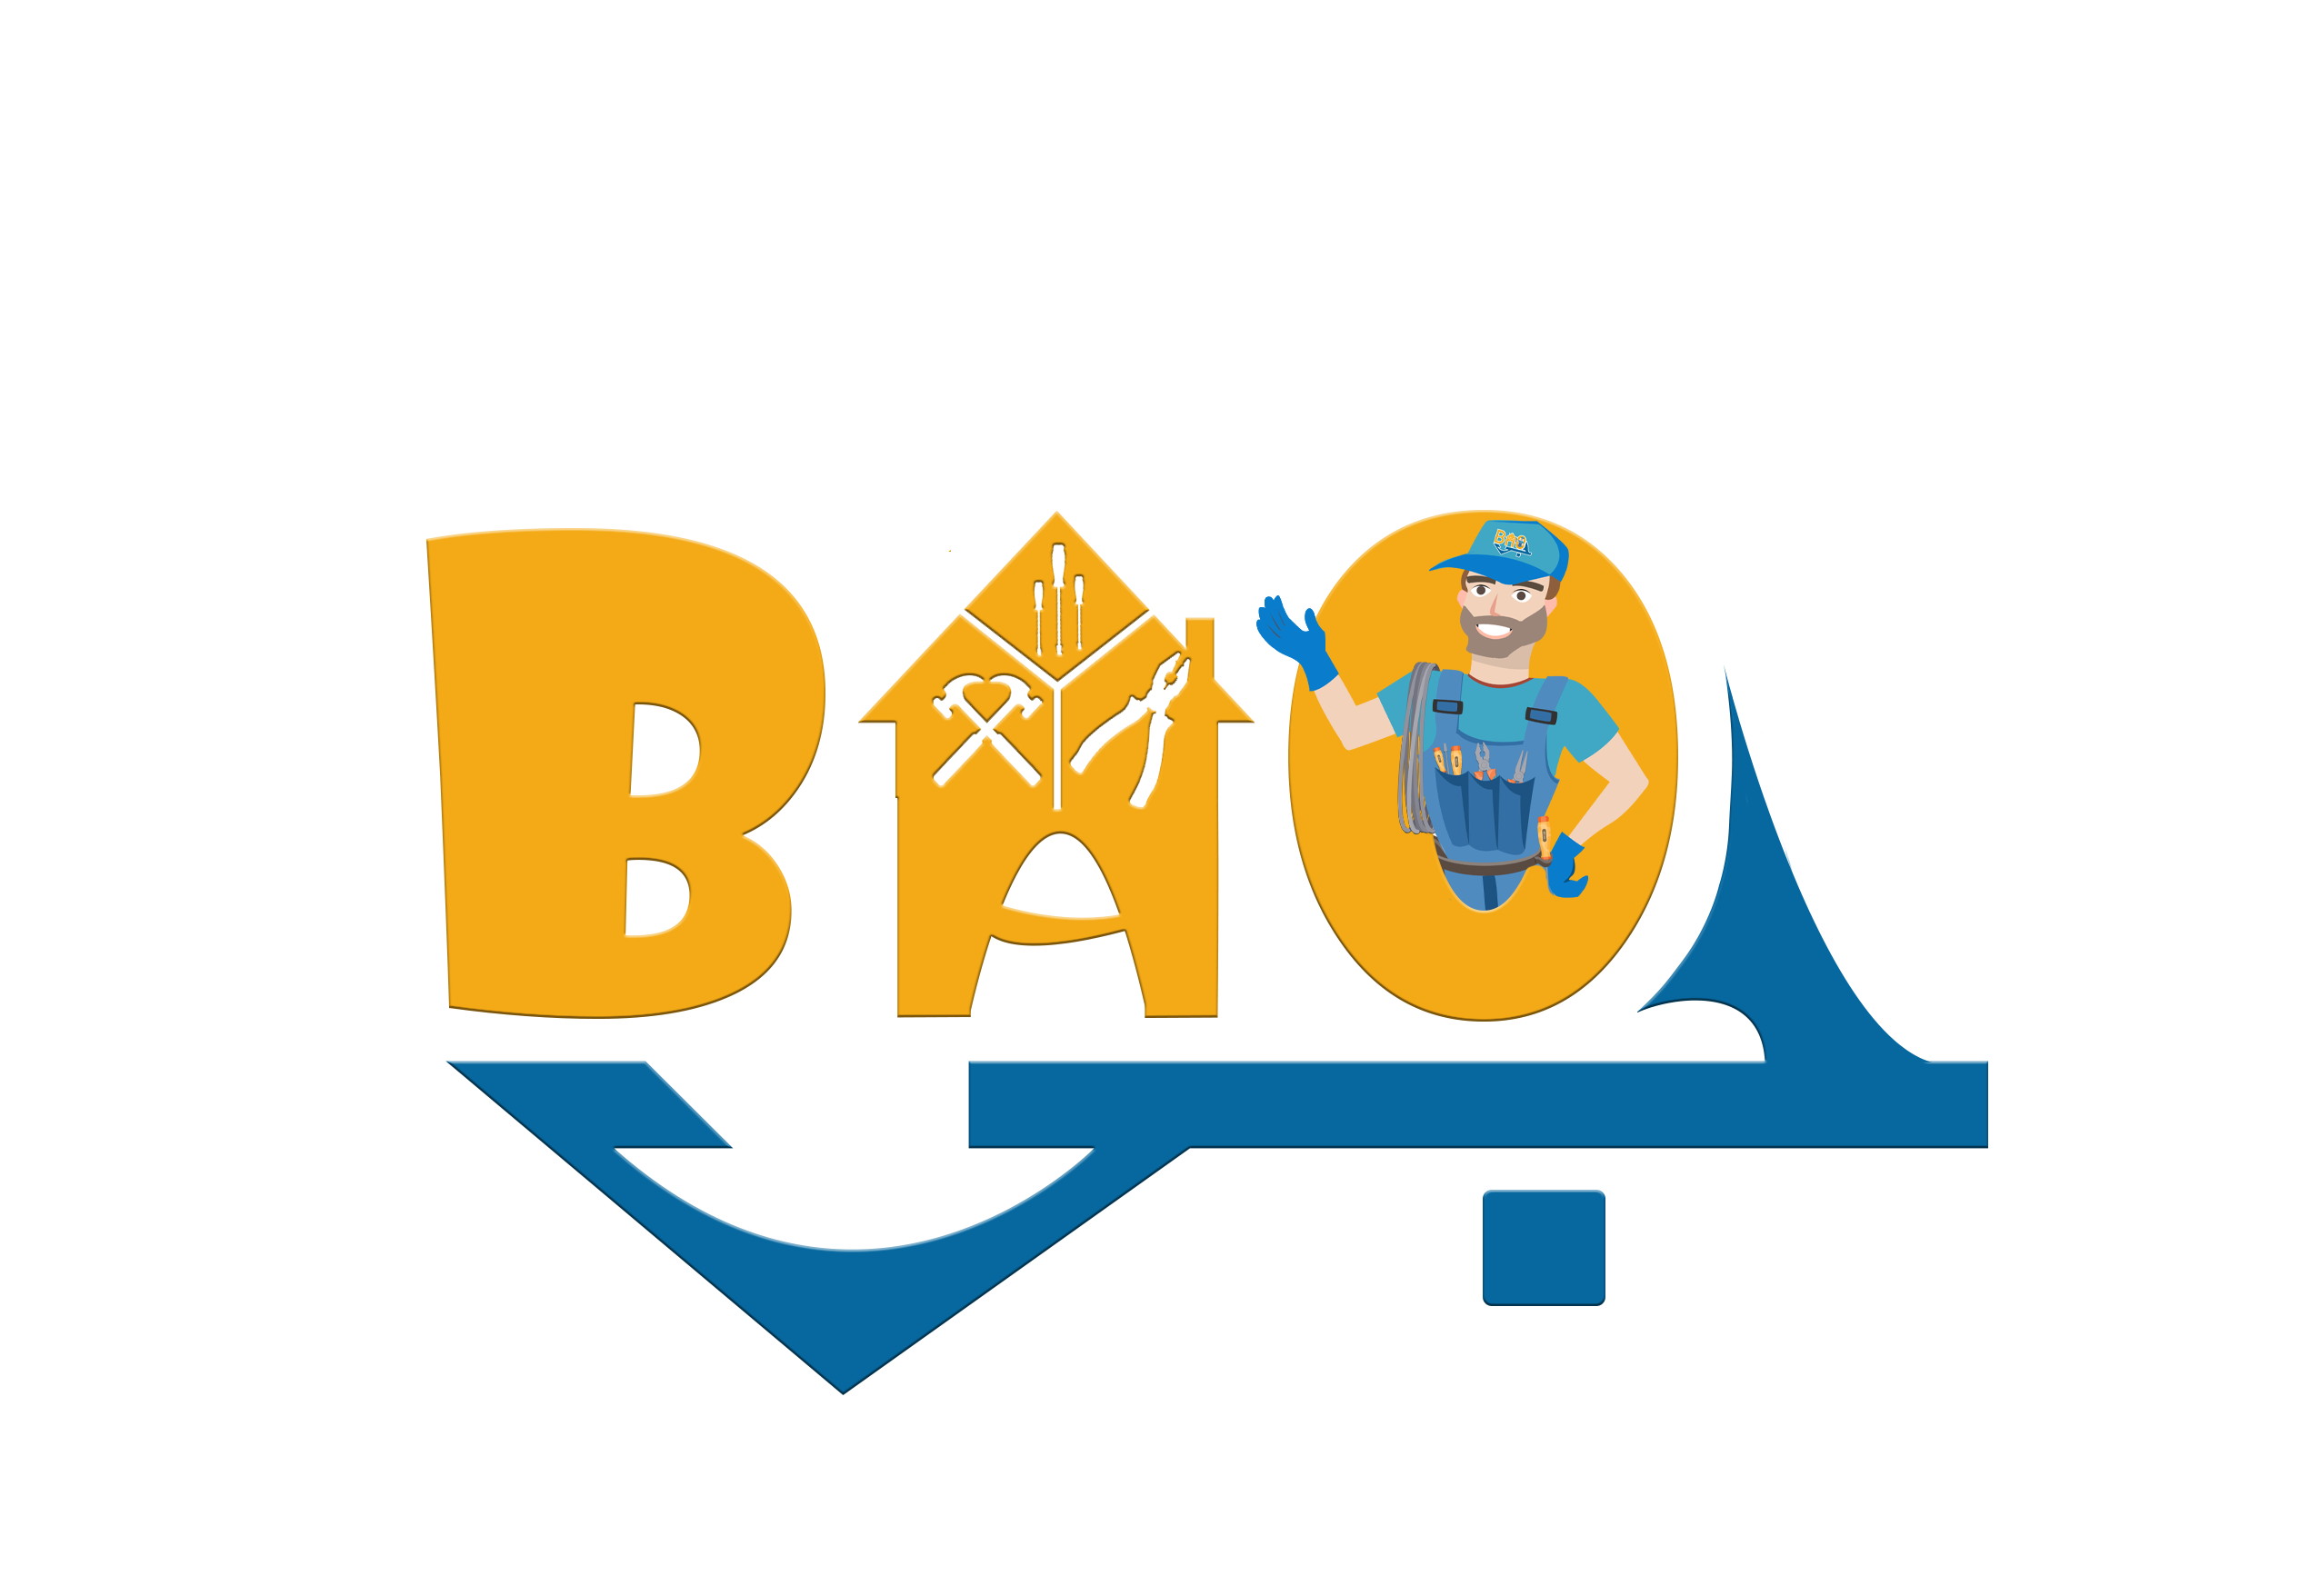 Bao G is the Best Home Maintenance Services Provider in pakistan